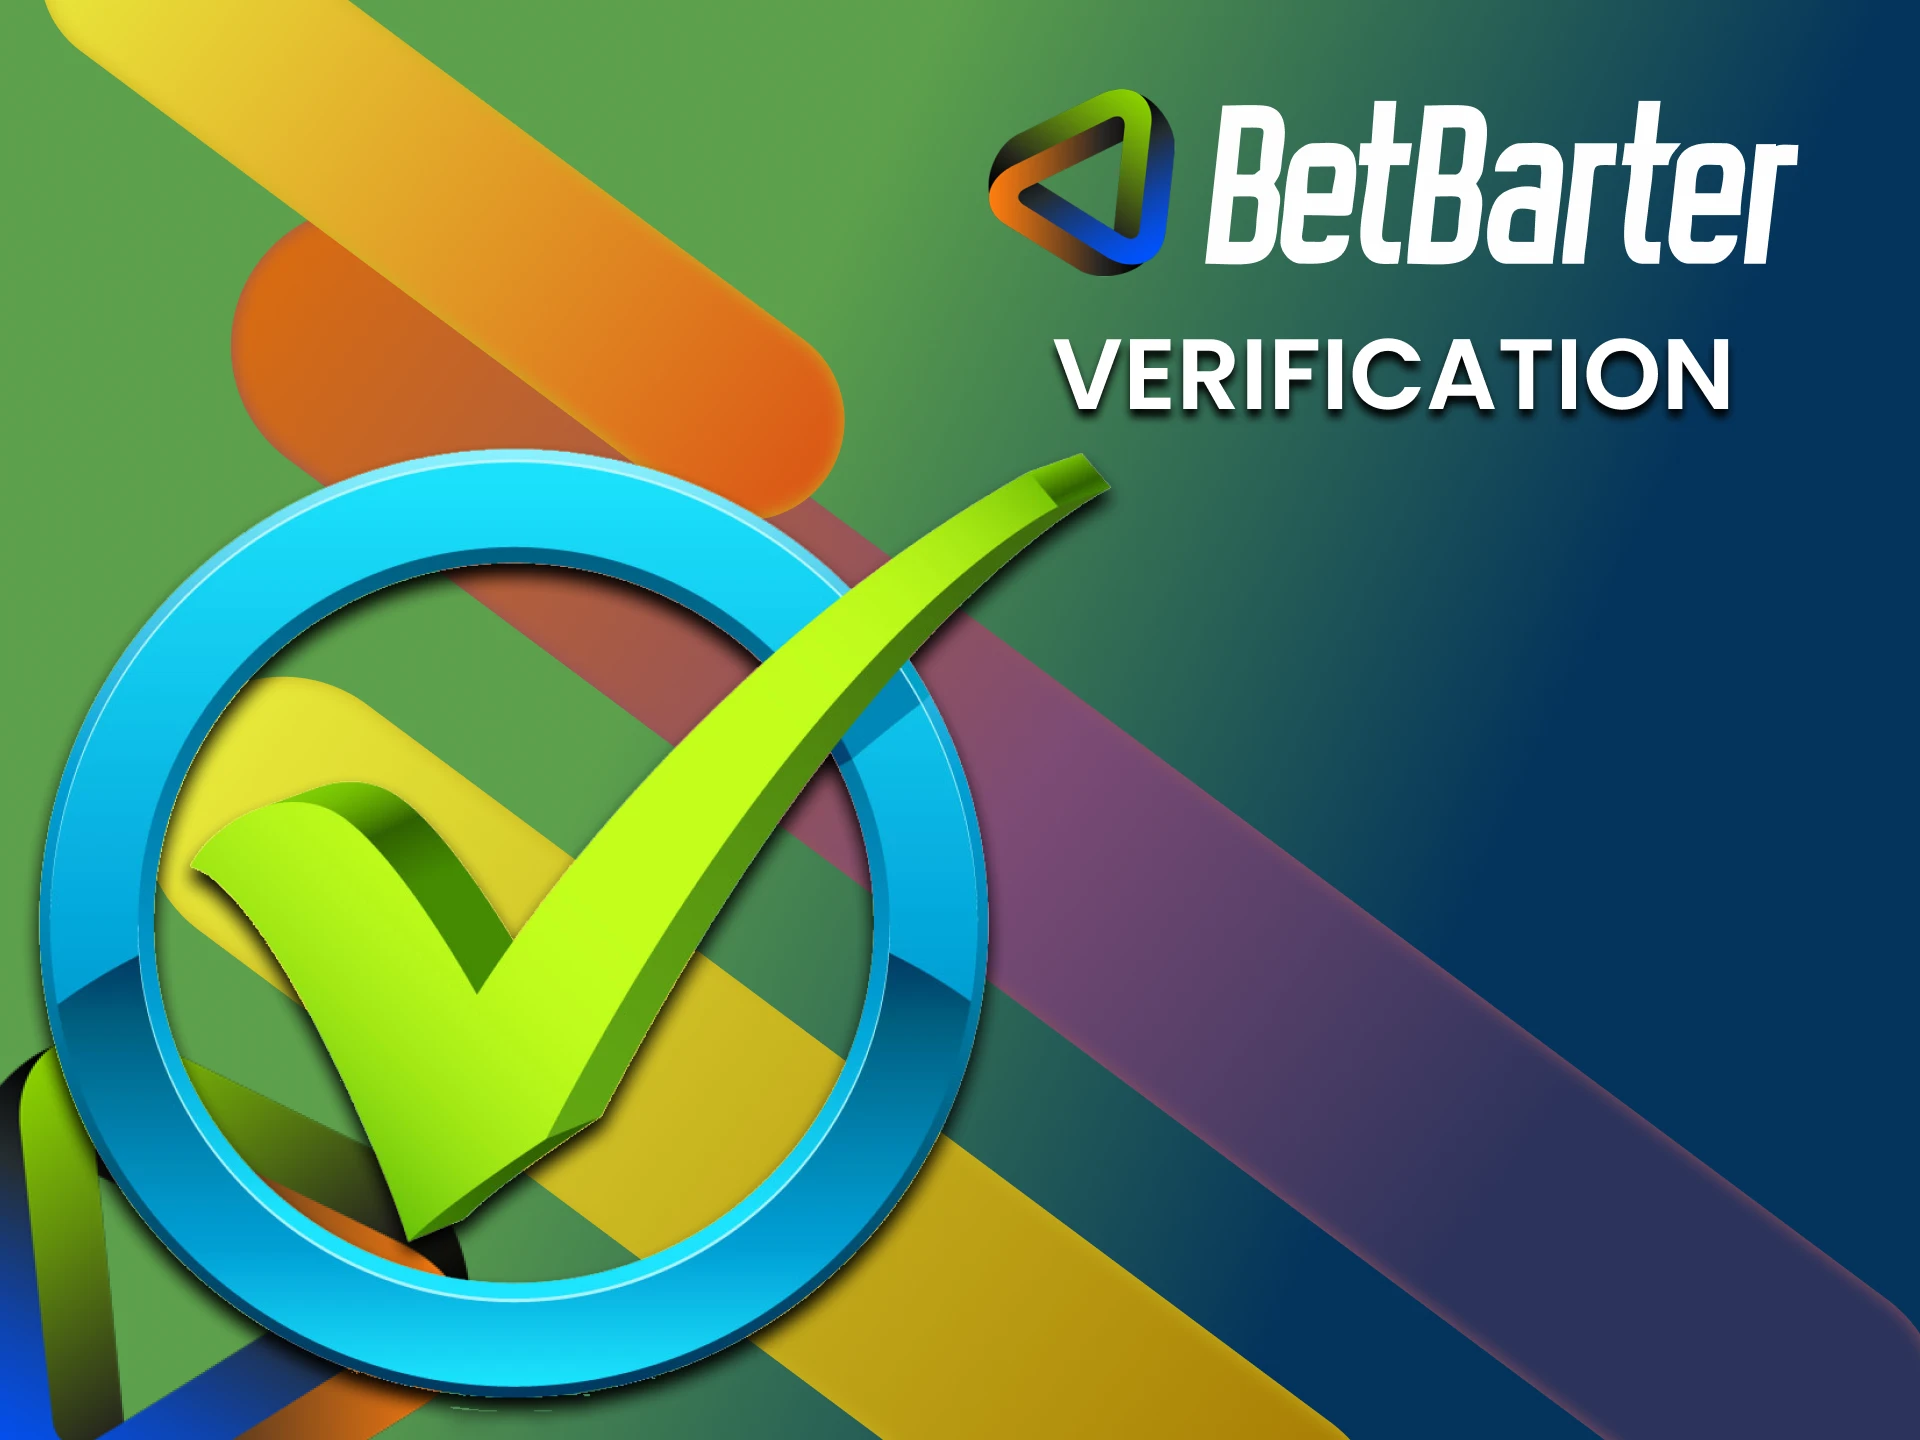 Fill out all the information for the BetBarter website.